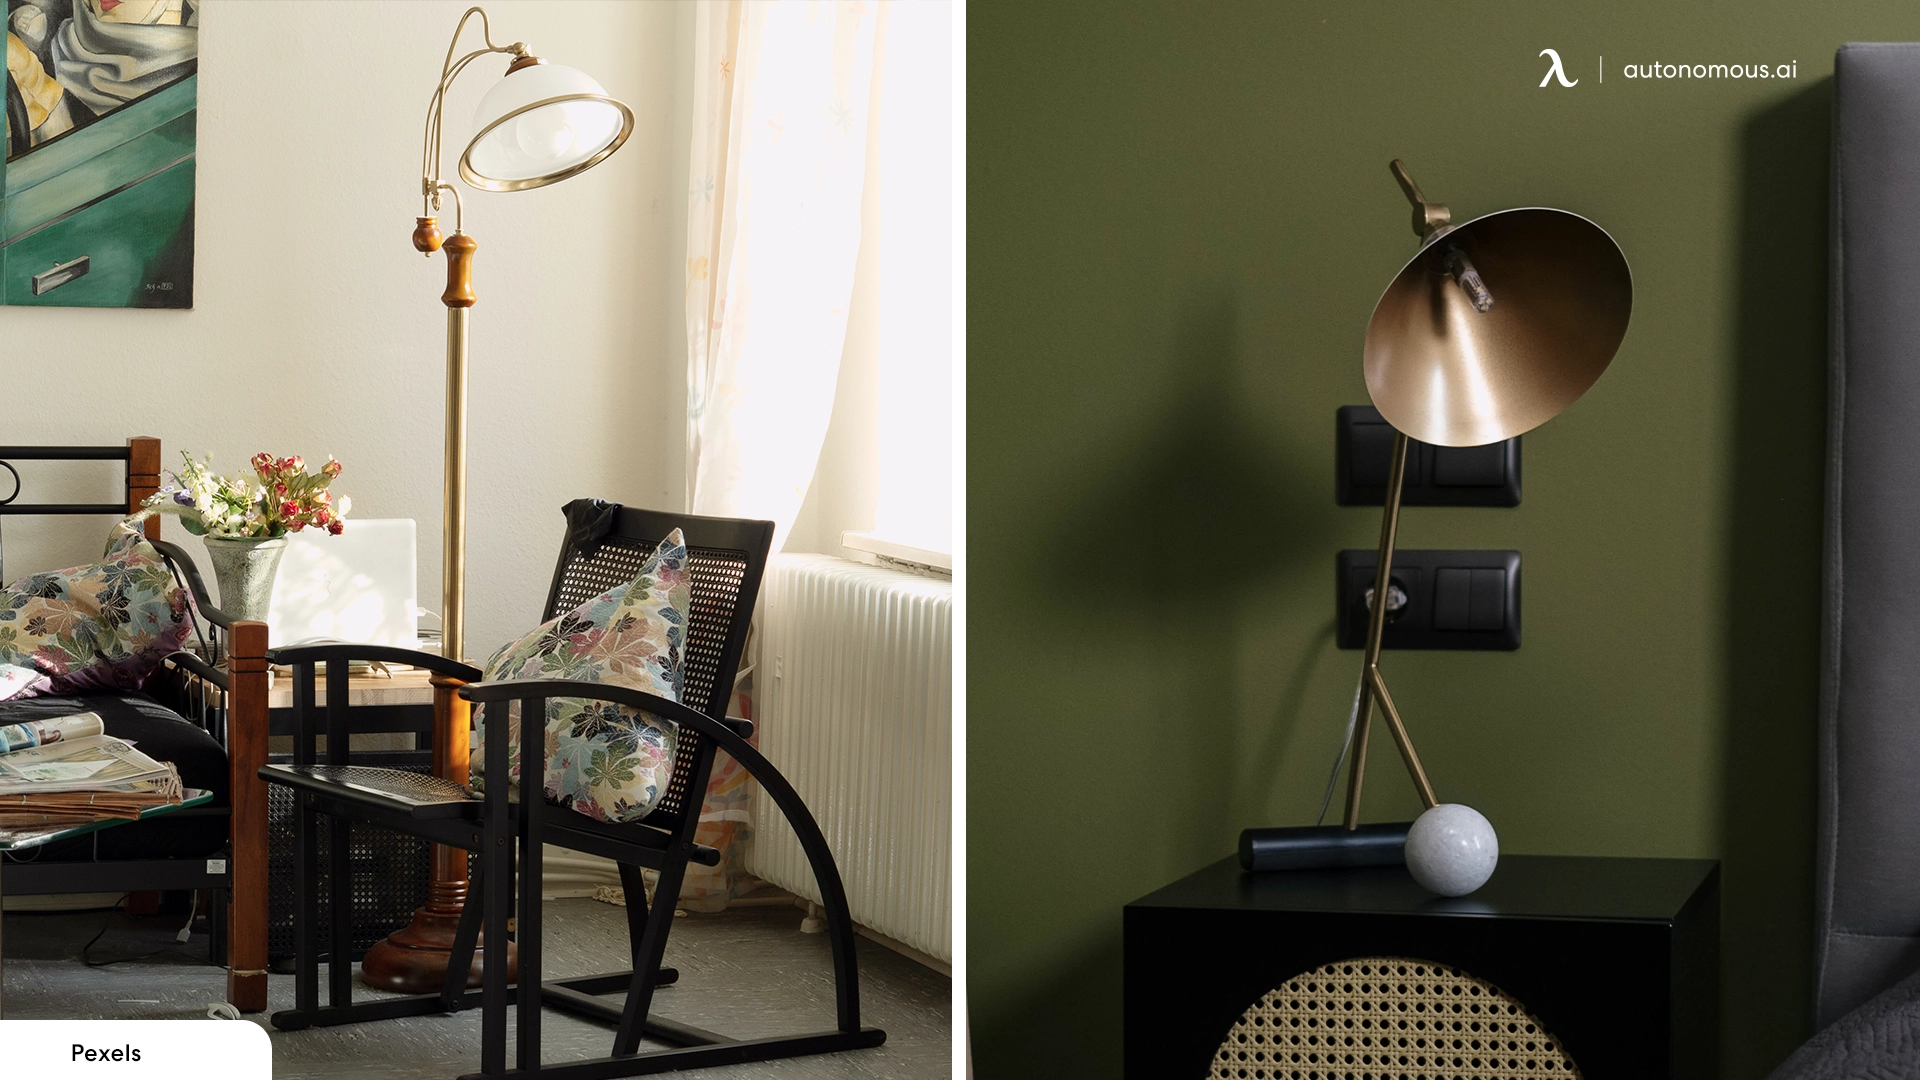 Floor Lamps vs. Table Lamps – Which Are Better?